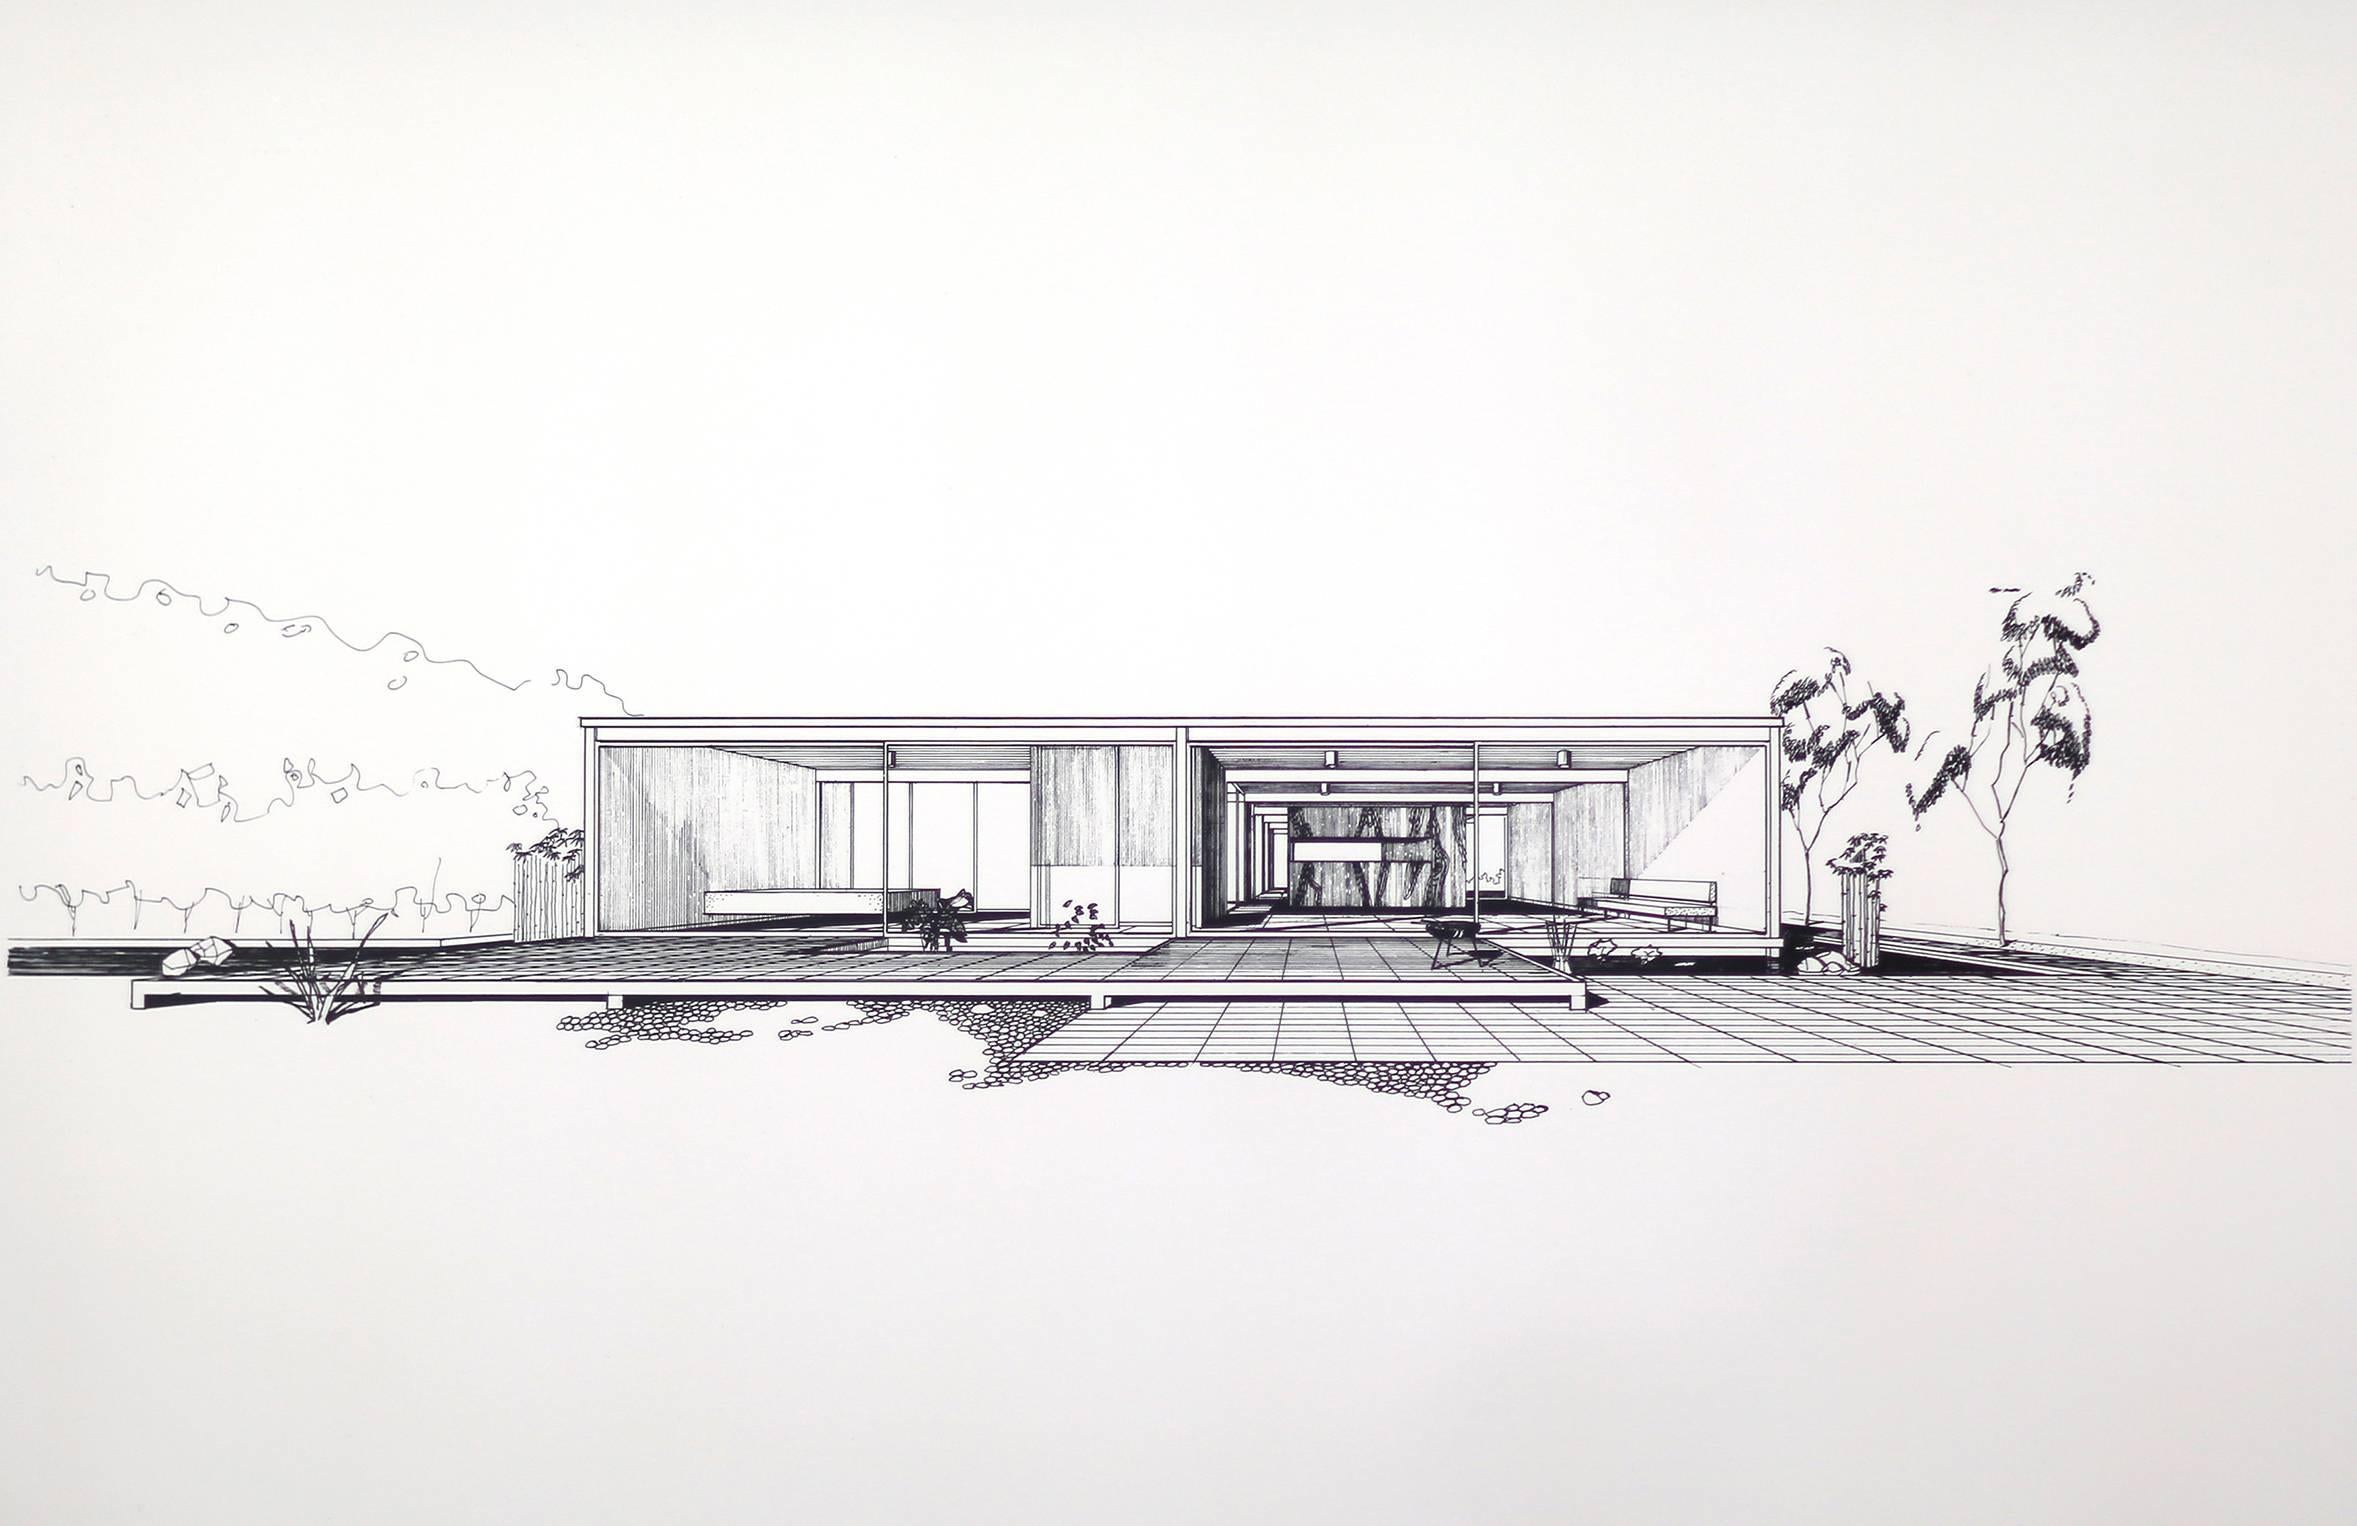 Pierre Koenig
Rendering of case study house 21 (south side), 1958
Photographic print from original line negative
Signed, Edition 1/50
The Bailey House, Los Angeles, California
Dimensions including frame: 30 high x 20 wide x 1.5 deep
